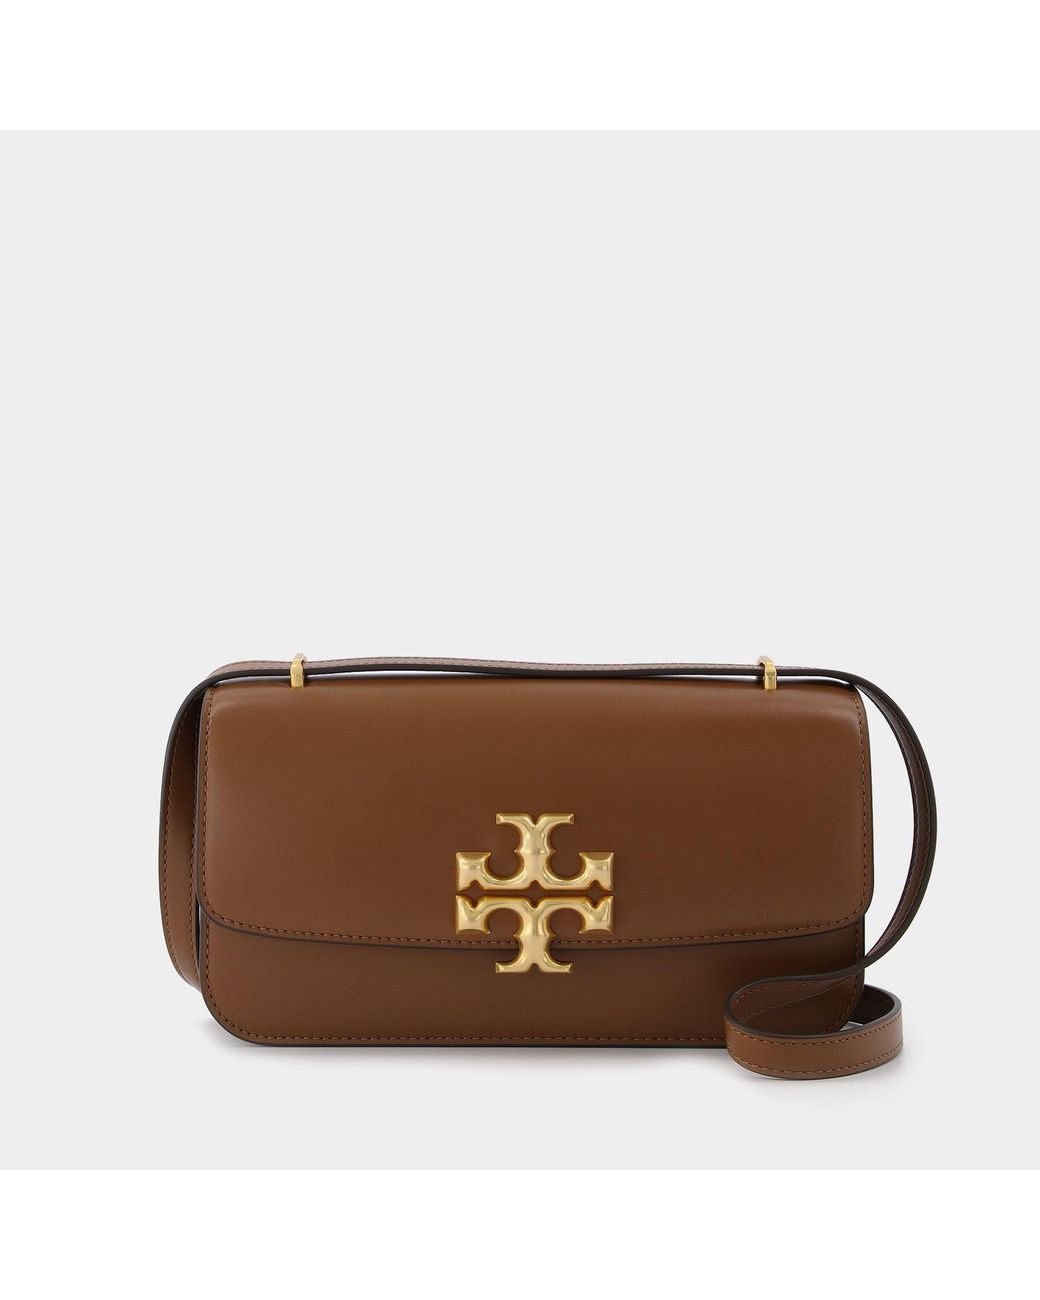 Tory Burch Leather Eleanor E/w Small Convertible Shoulder Bag in Brown ...